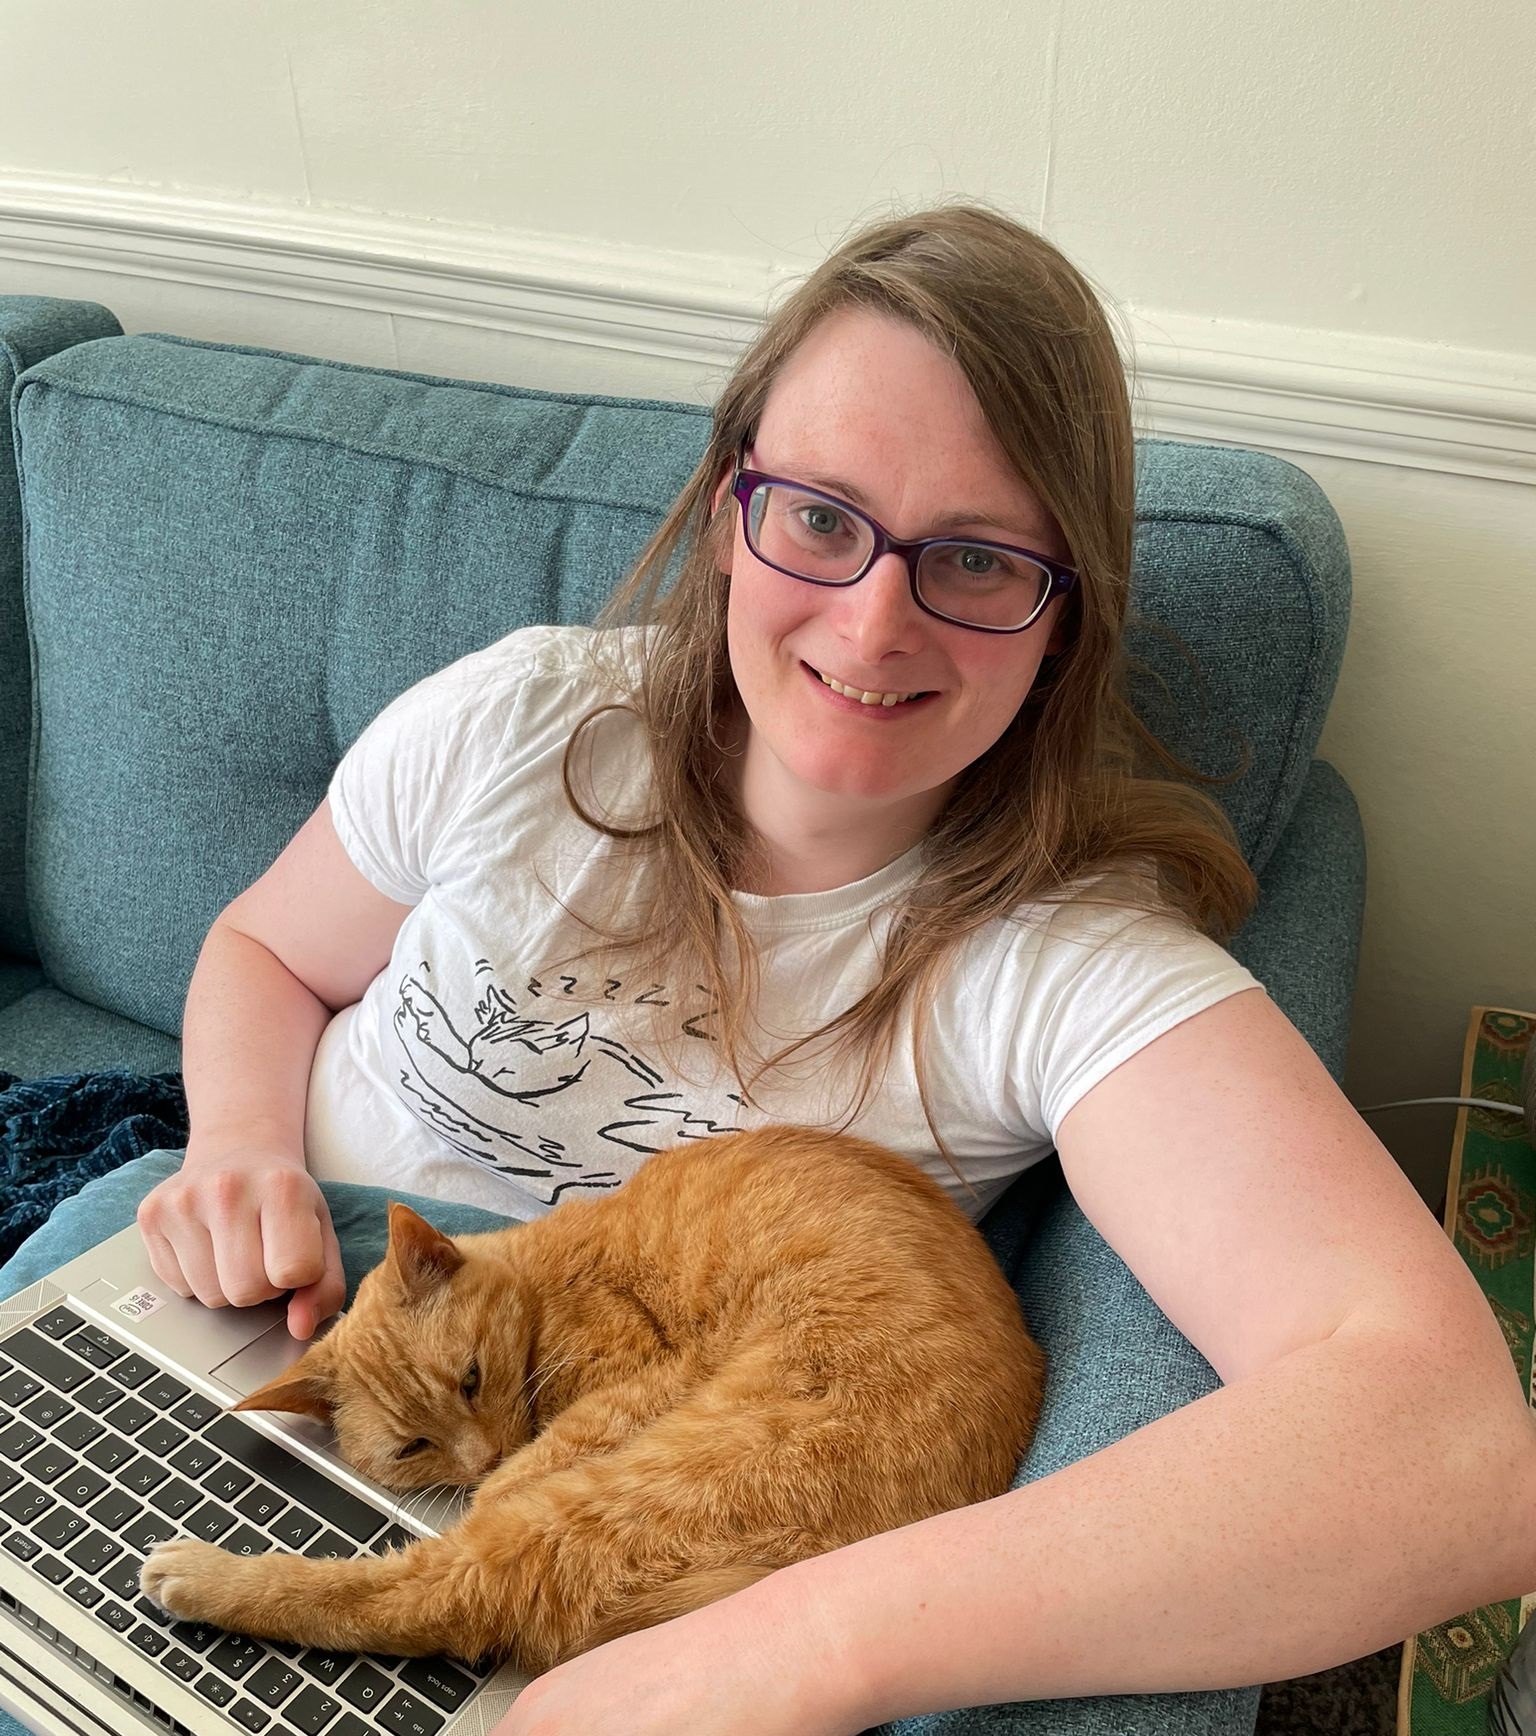 A smiling white woman sitting on a chair with a laptop, and a cat curled up into her.